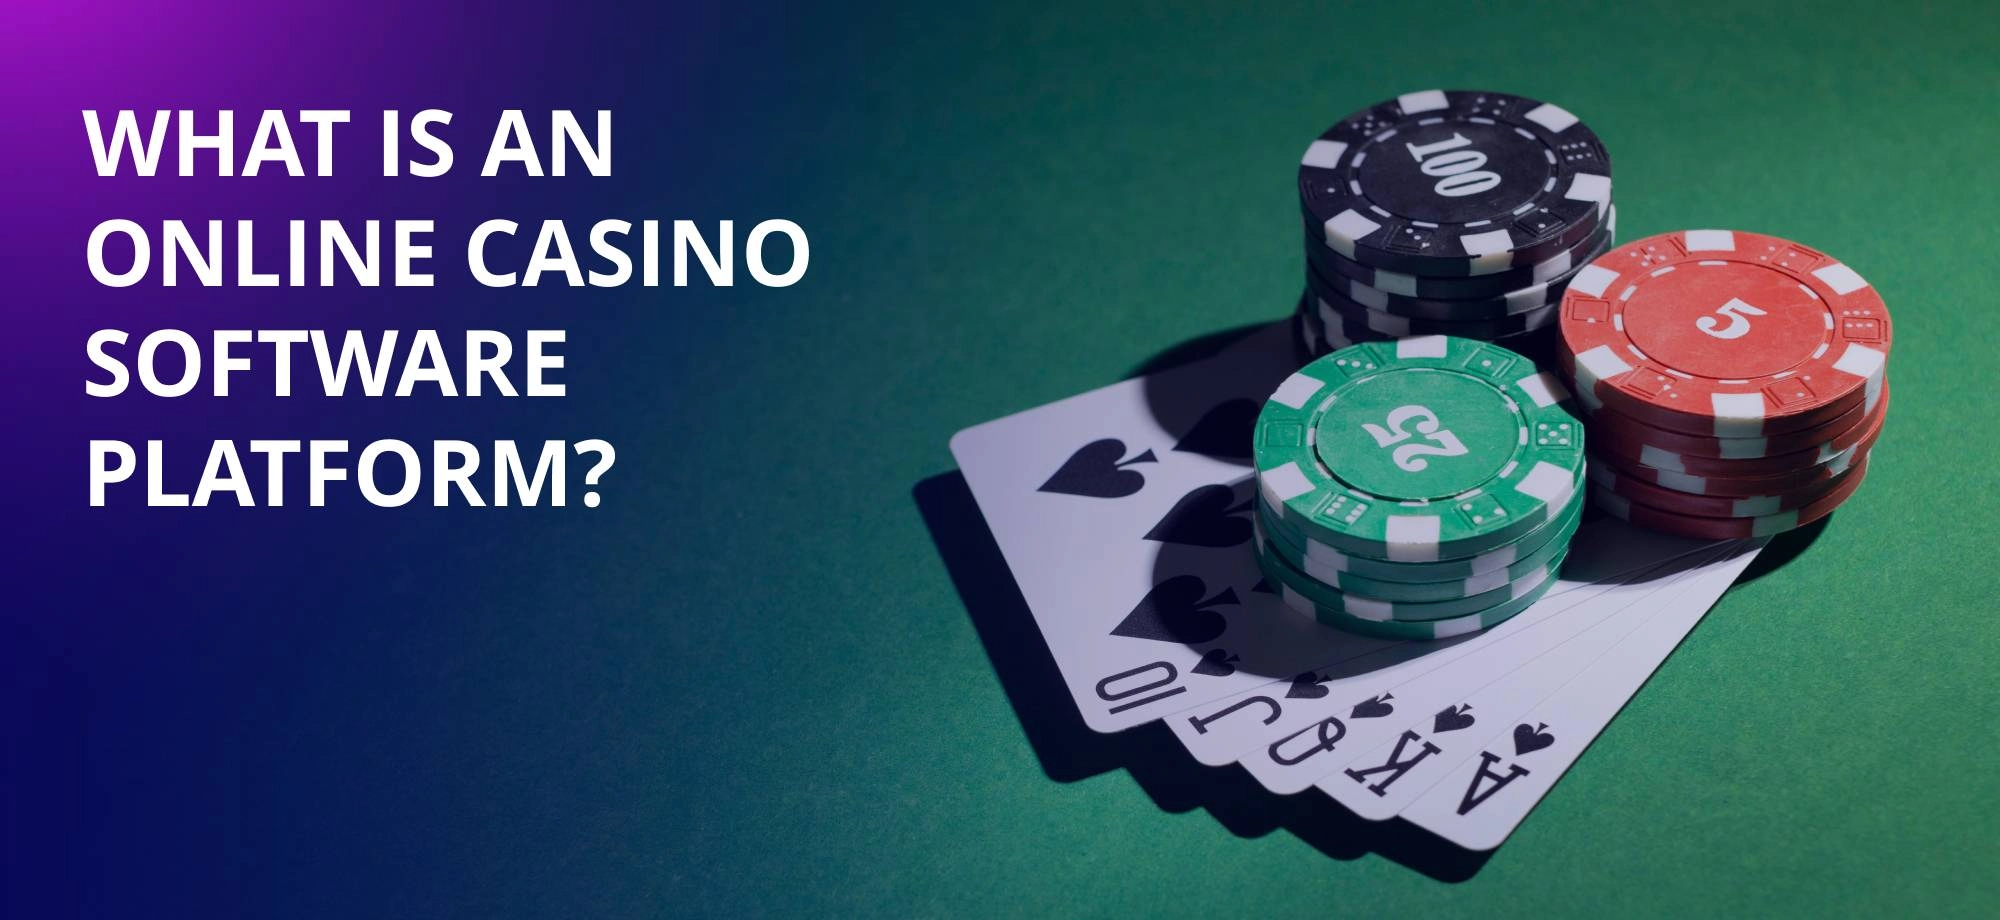 What Features Are Most Important to Online Casino Software Platforms?